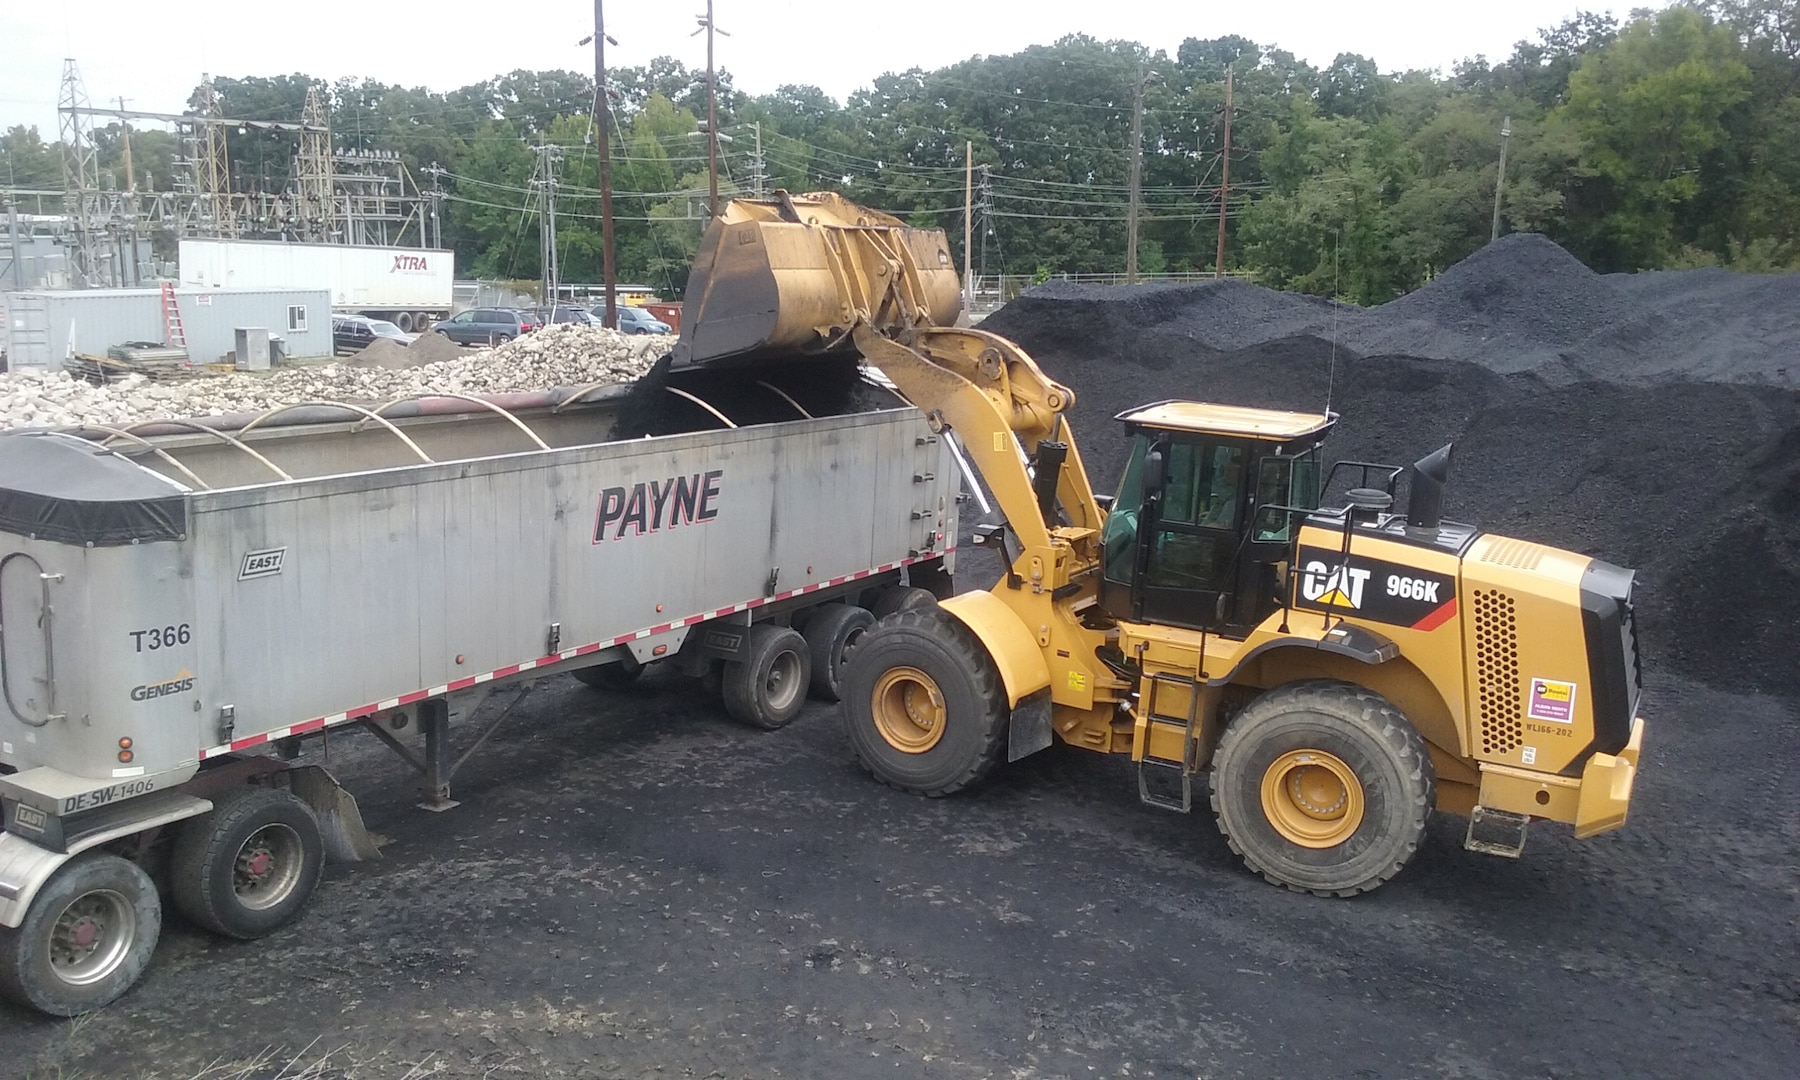 Bituminous coal is removed from a shuttered power plant at U.S. Navy Surface Warfare Center Indian Head in Maryland. The DLA Disposition Services assistance in finding a new home for the coal saved an estimated $6 million in removal costs.